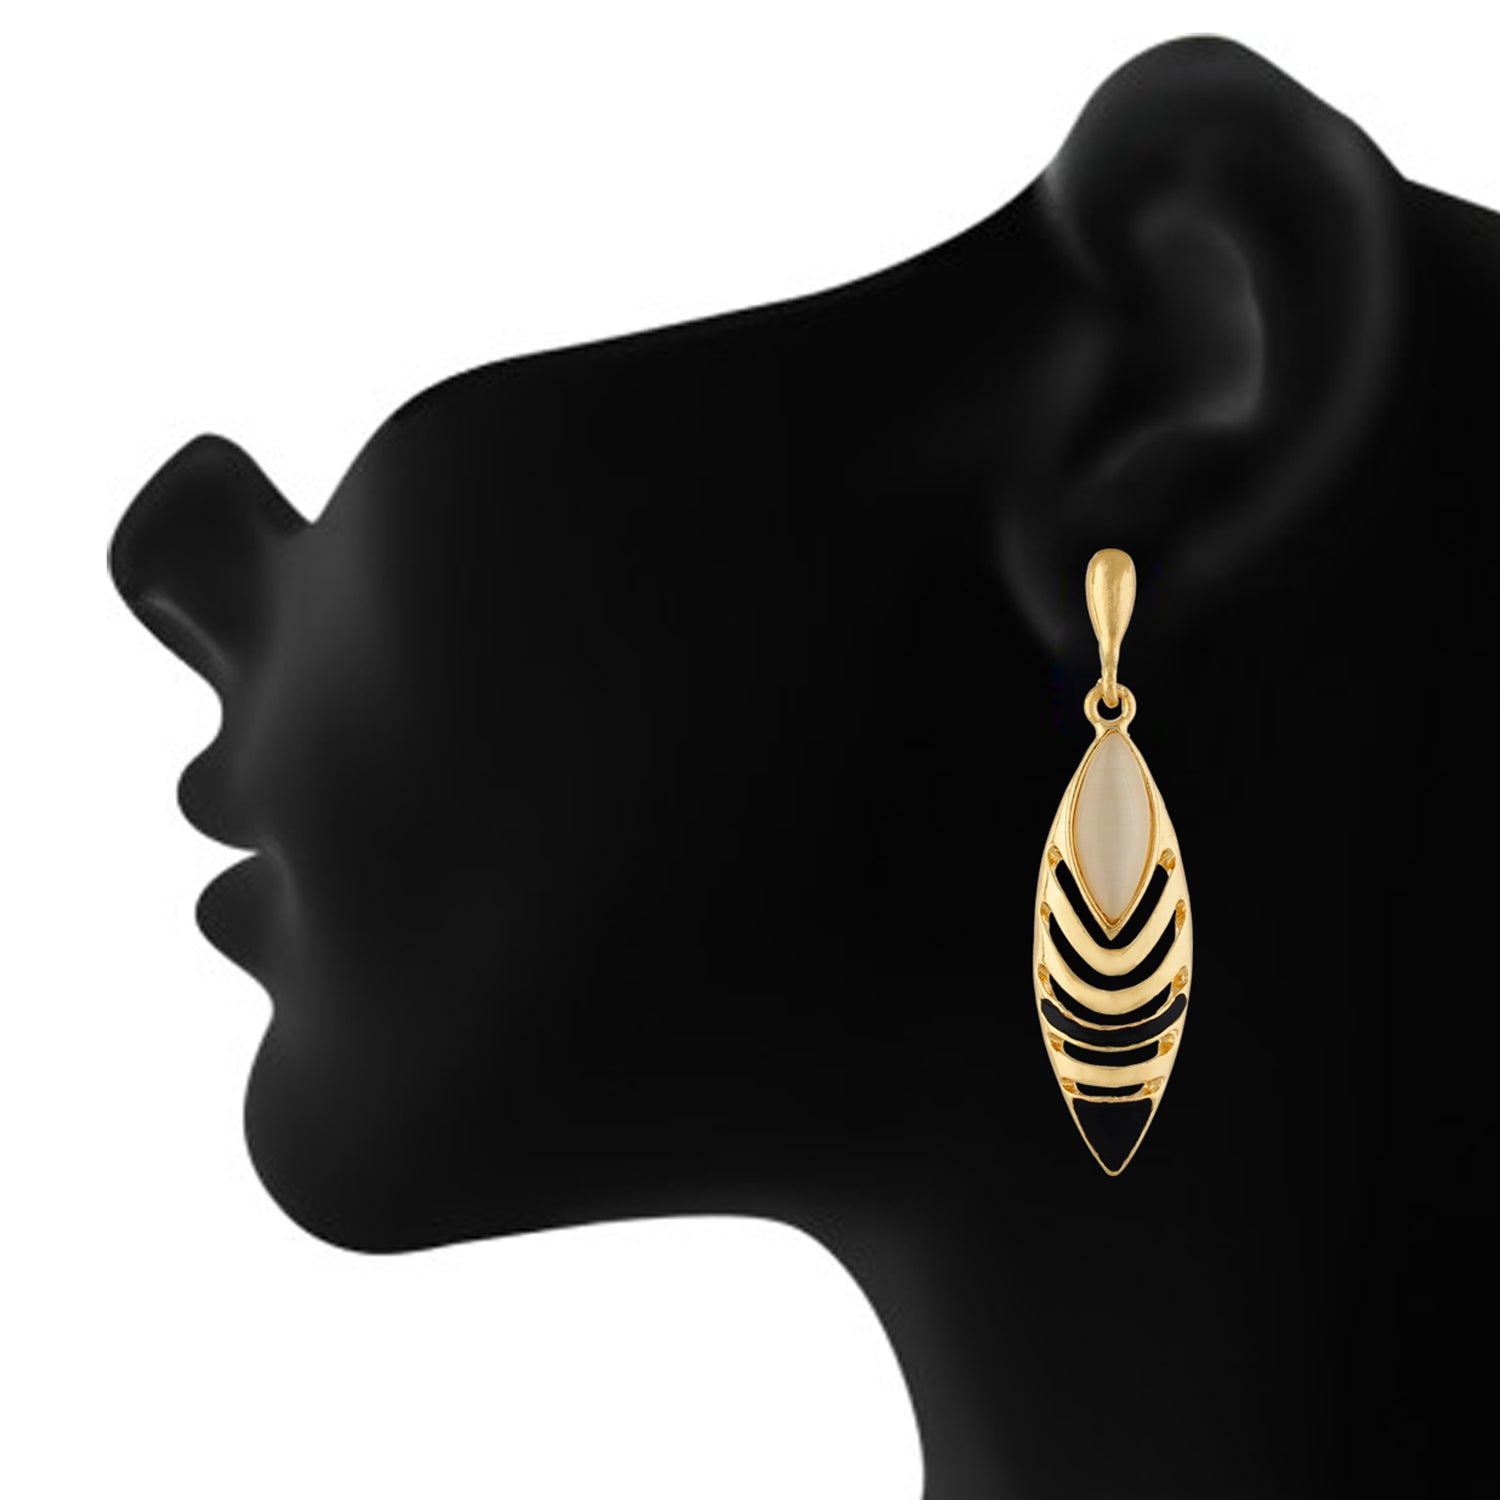 Popular Black and Gold Colour Oval Shape Earring for Girls and Women